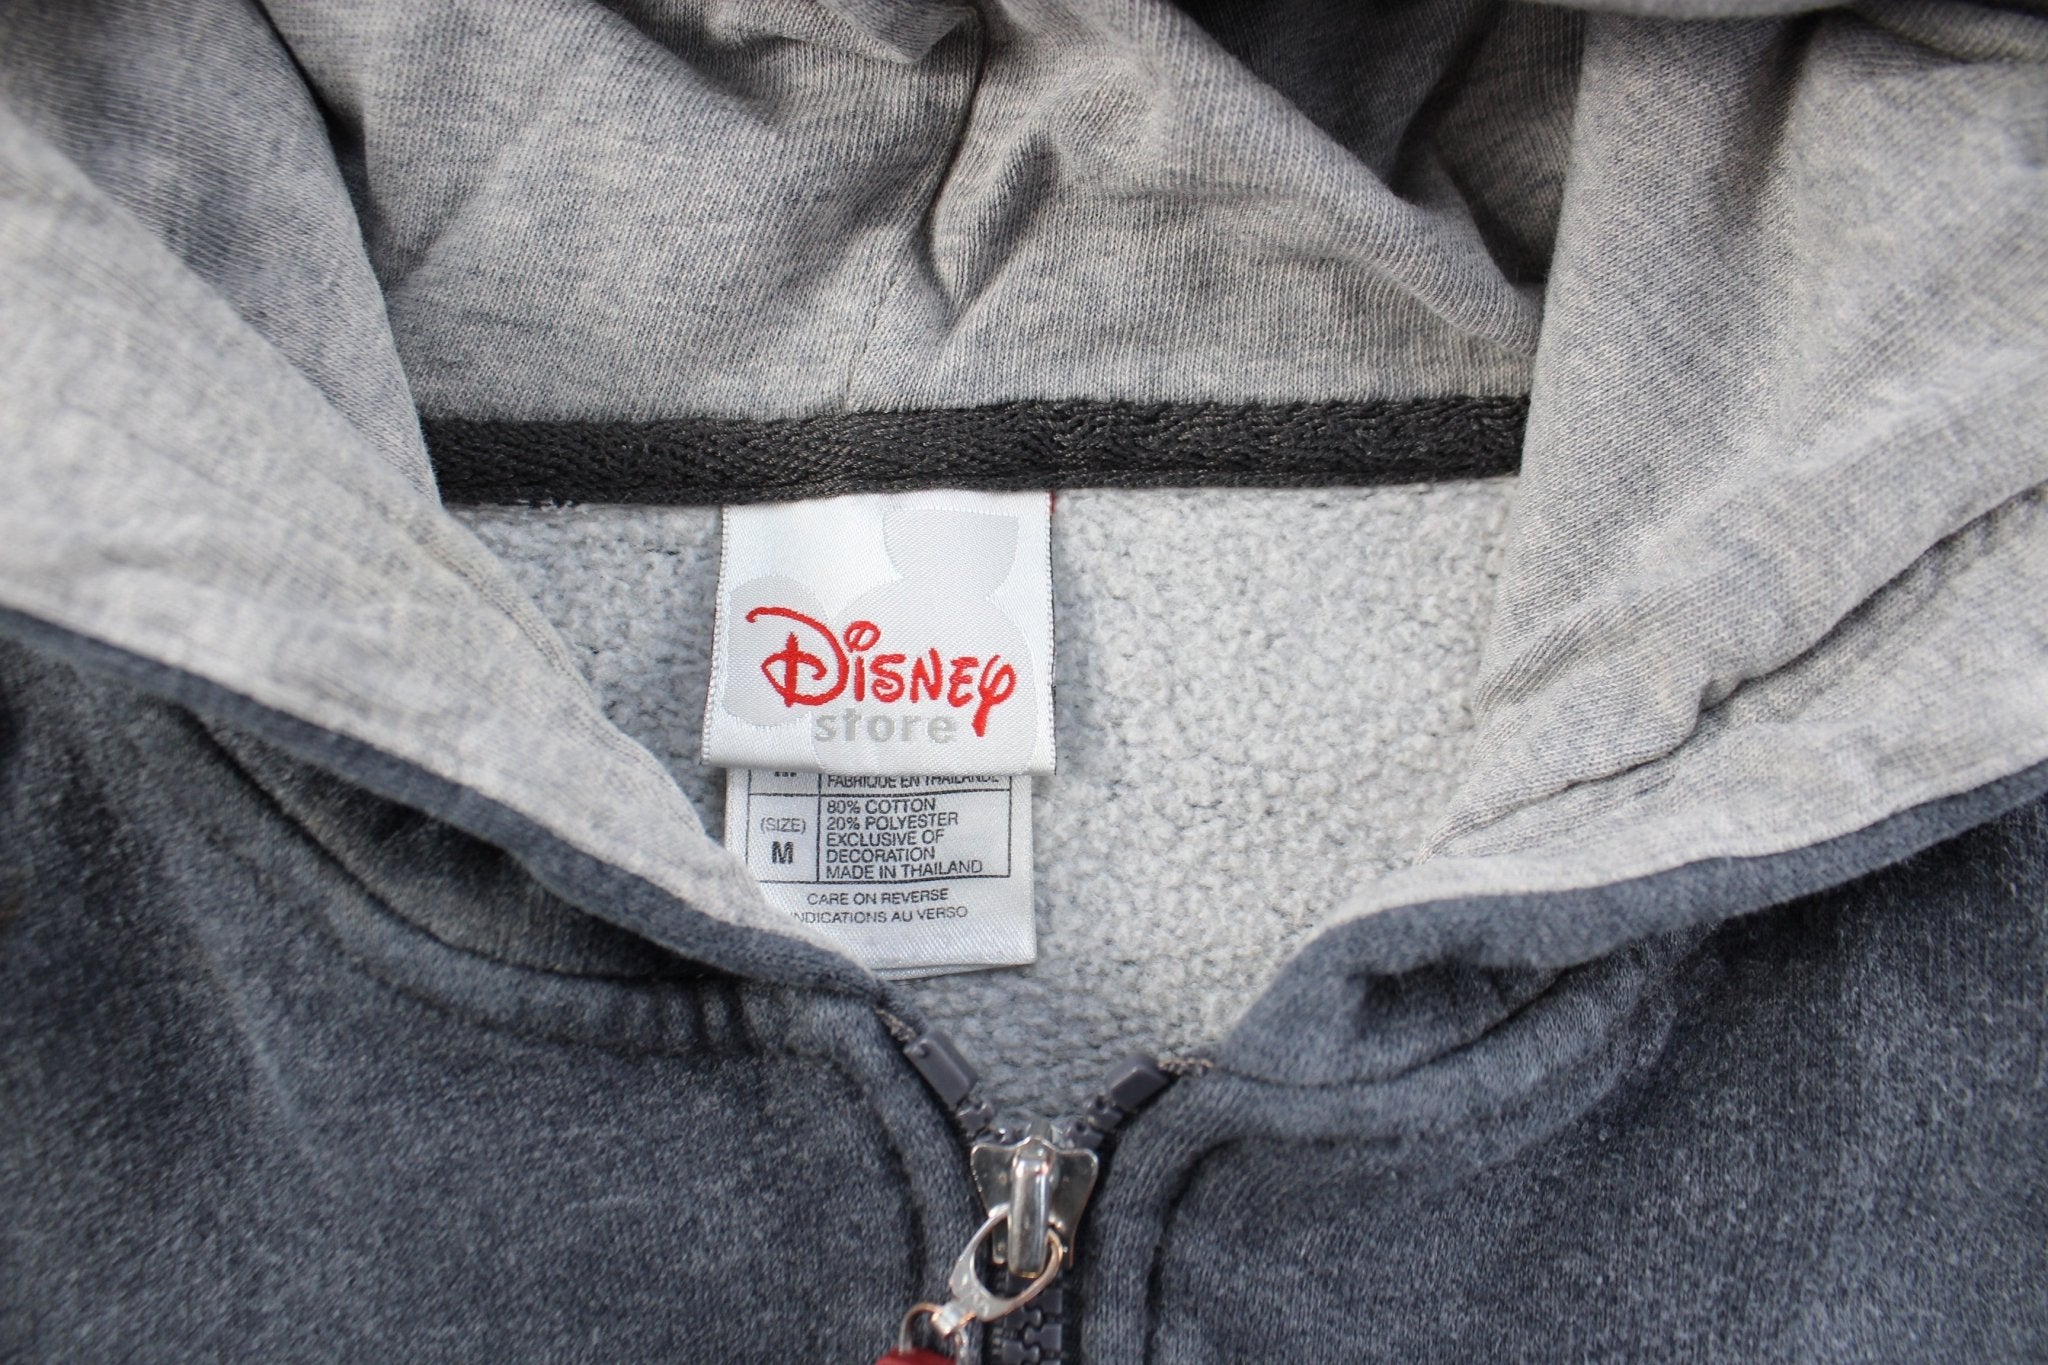 Disney Store Embroidered Mickey Mouse Zip Up Jacket - ThriftedThreads.com